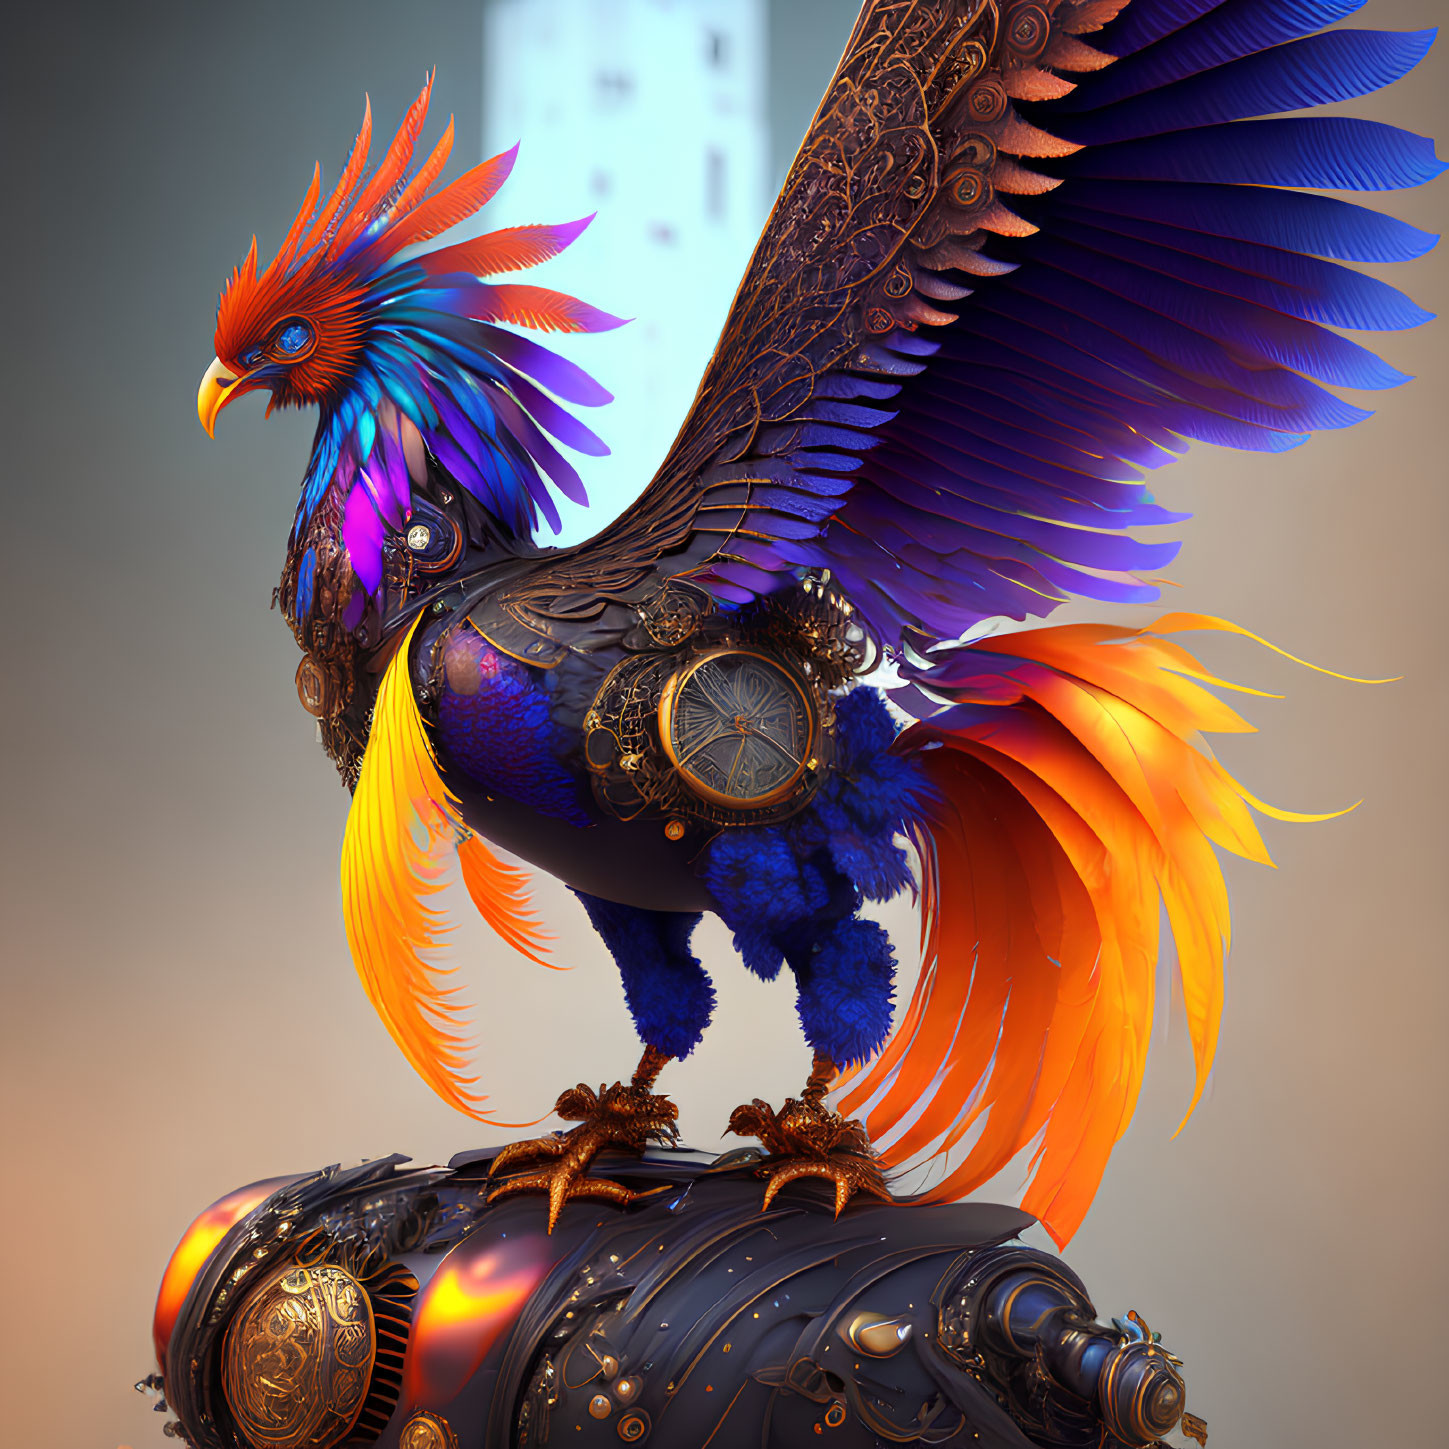 Mechanical mythical bird with fiery tail on steampunk structure